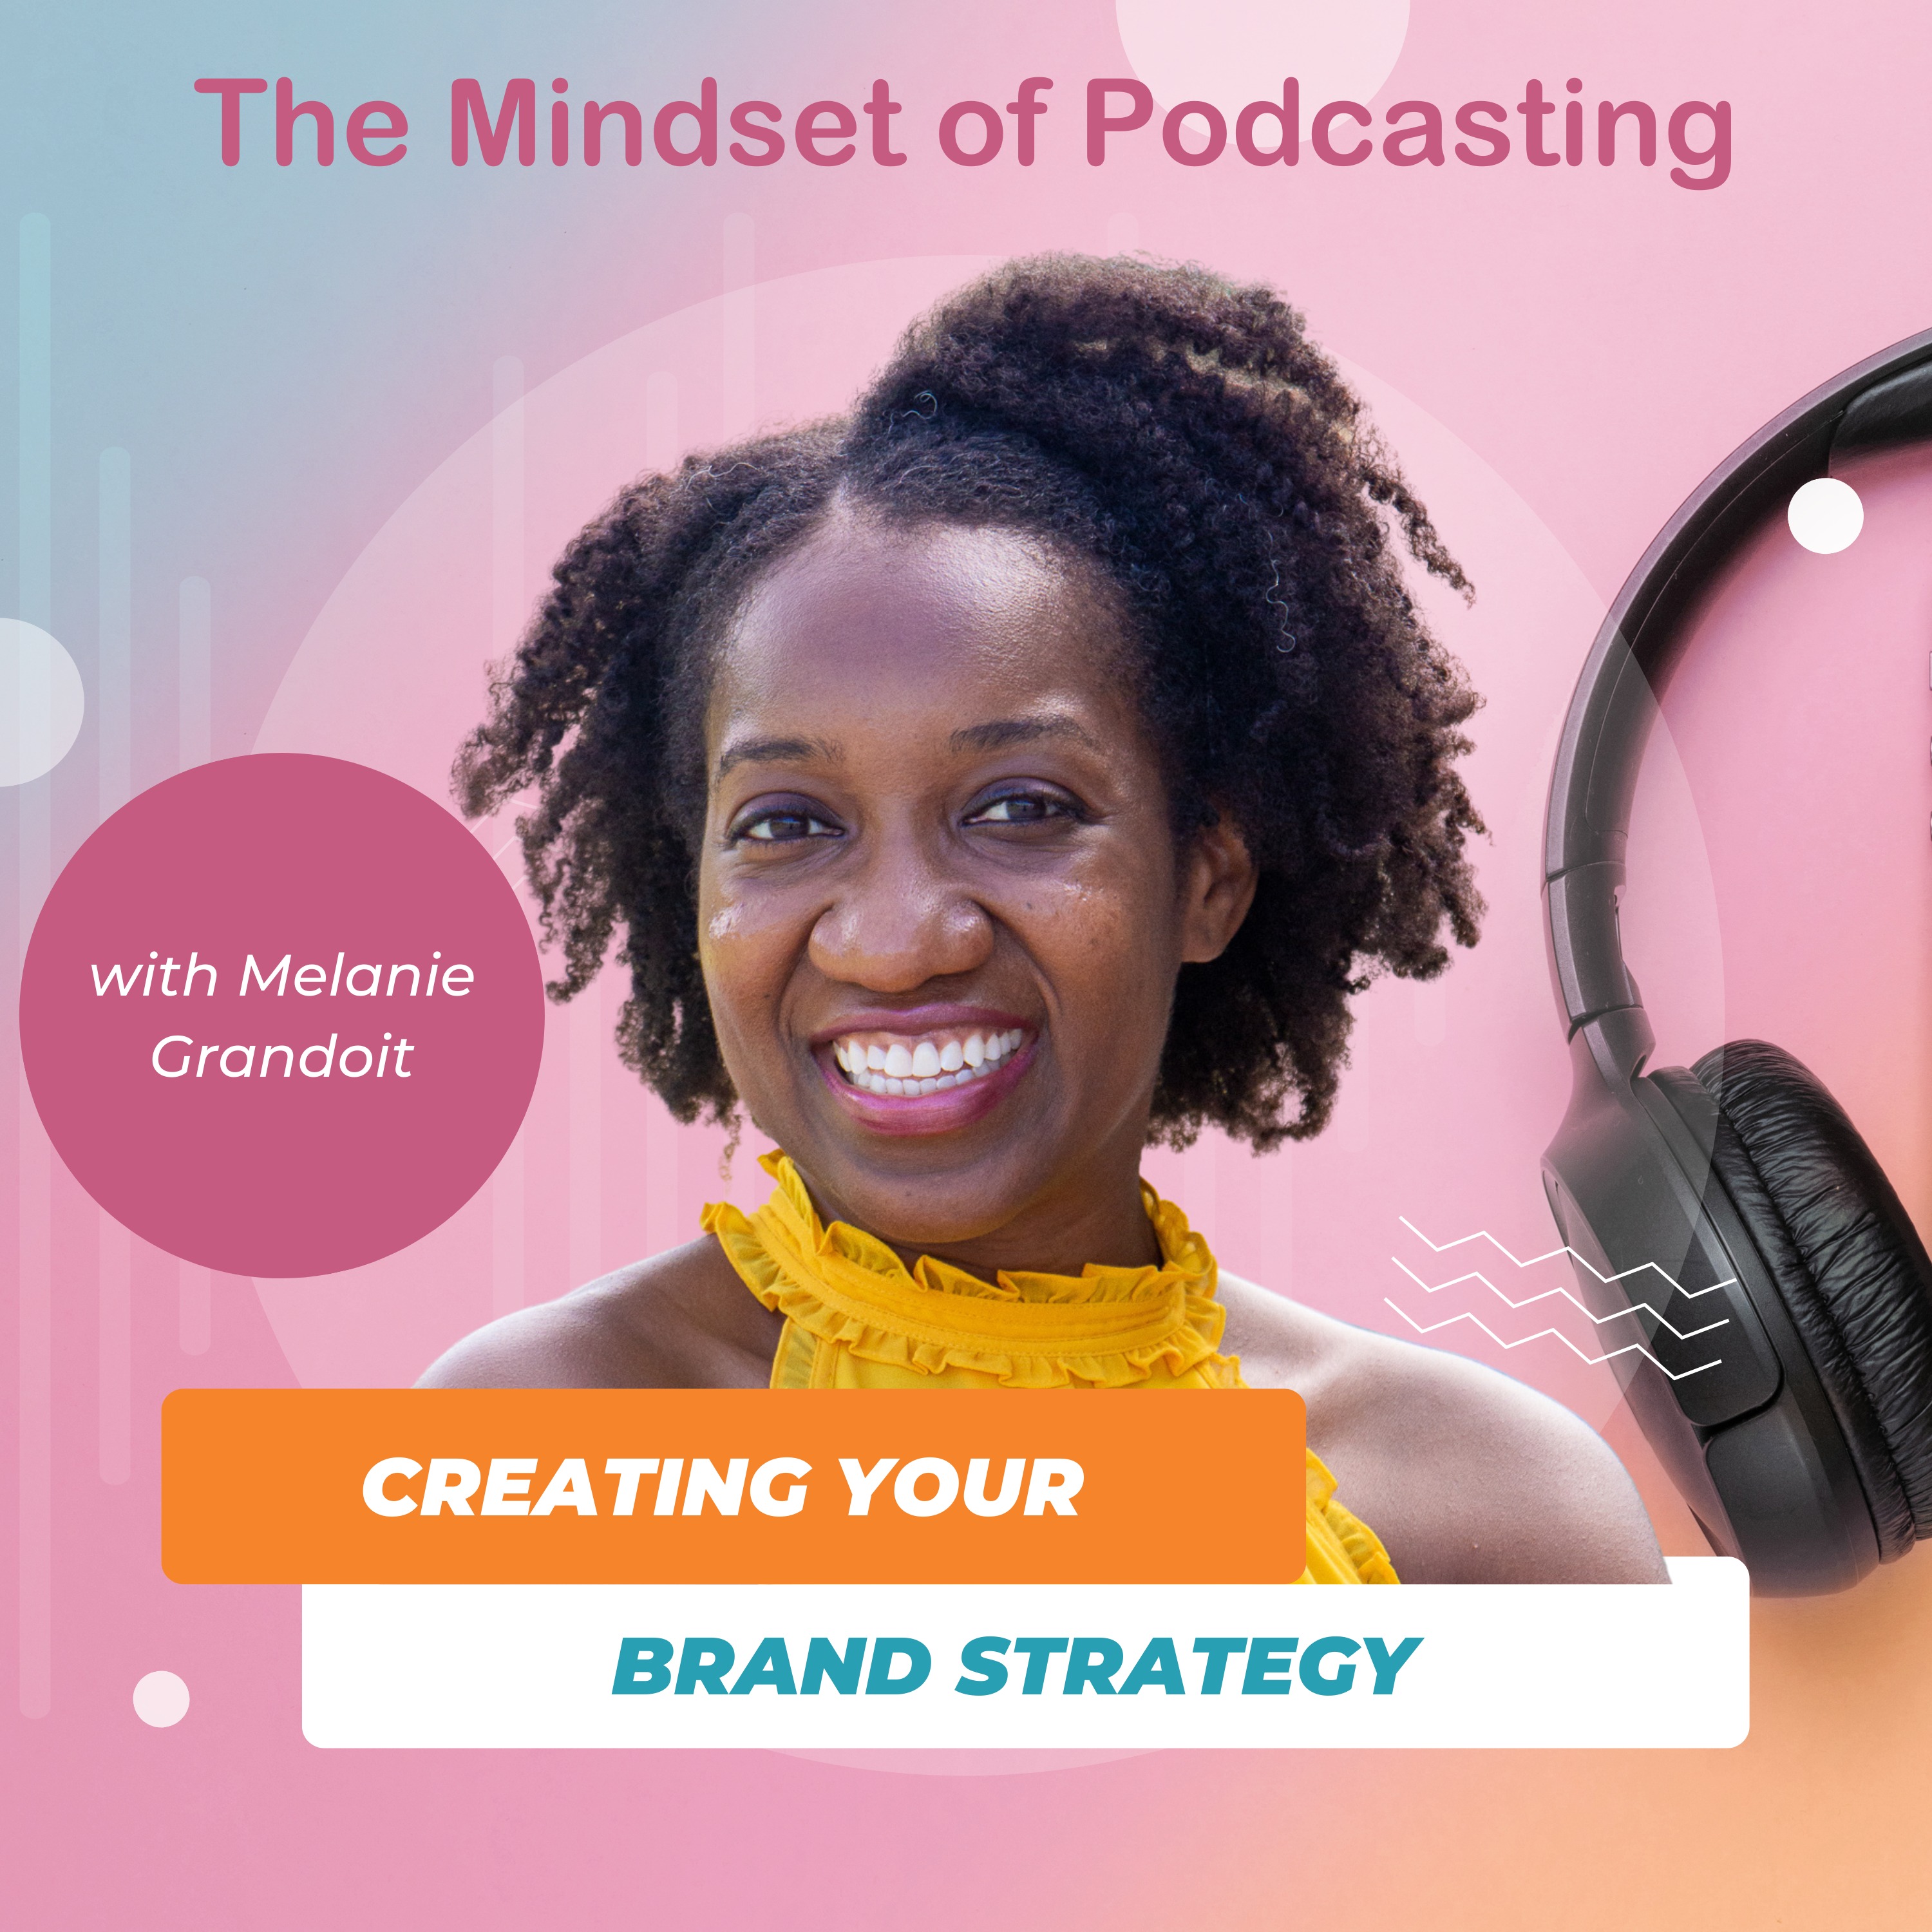 Creating Your Brand Strategy with Melanie Grandoit Image